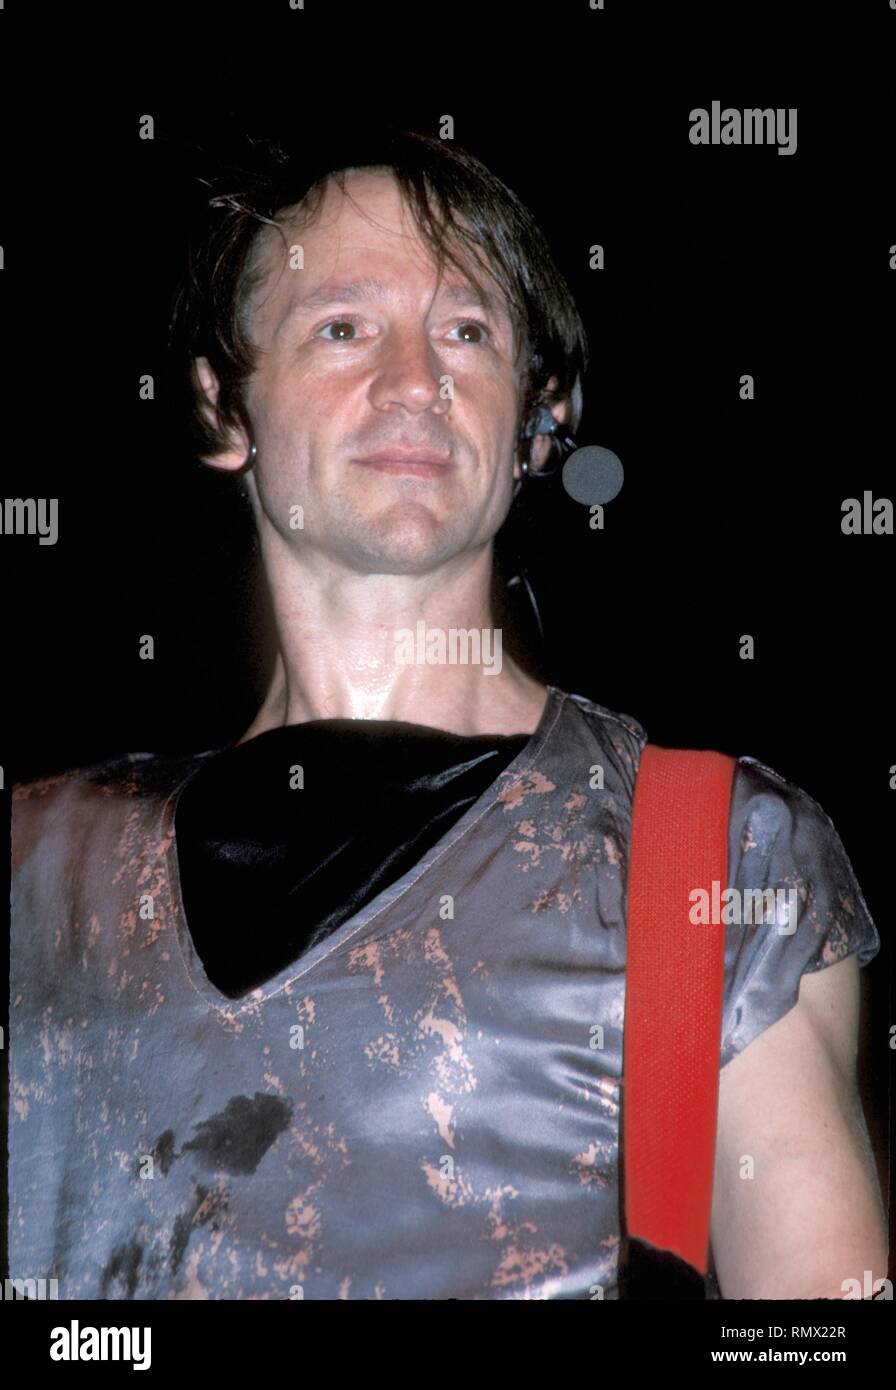 Guitarist and singer Peter Tork of the Monkees is shown performing on stage during a 'live' concert appearance. Stock Photo